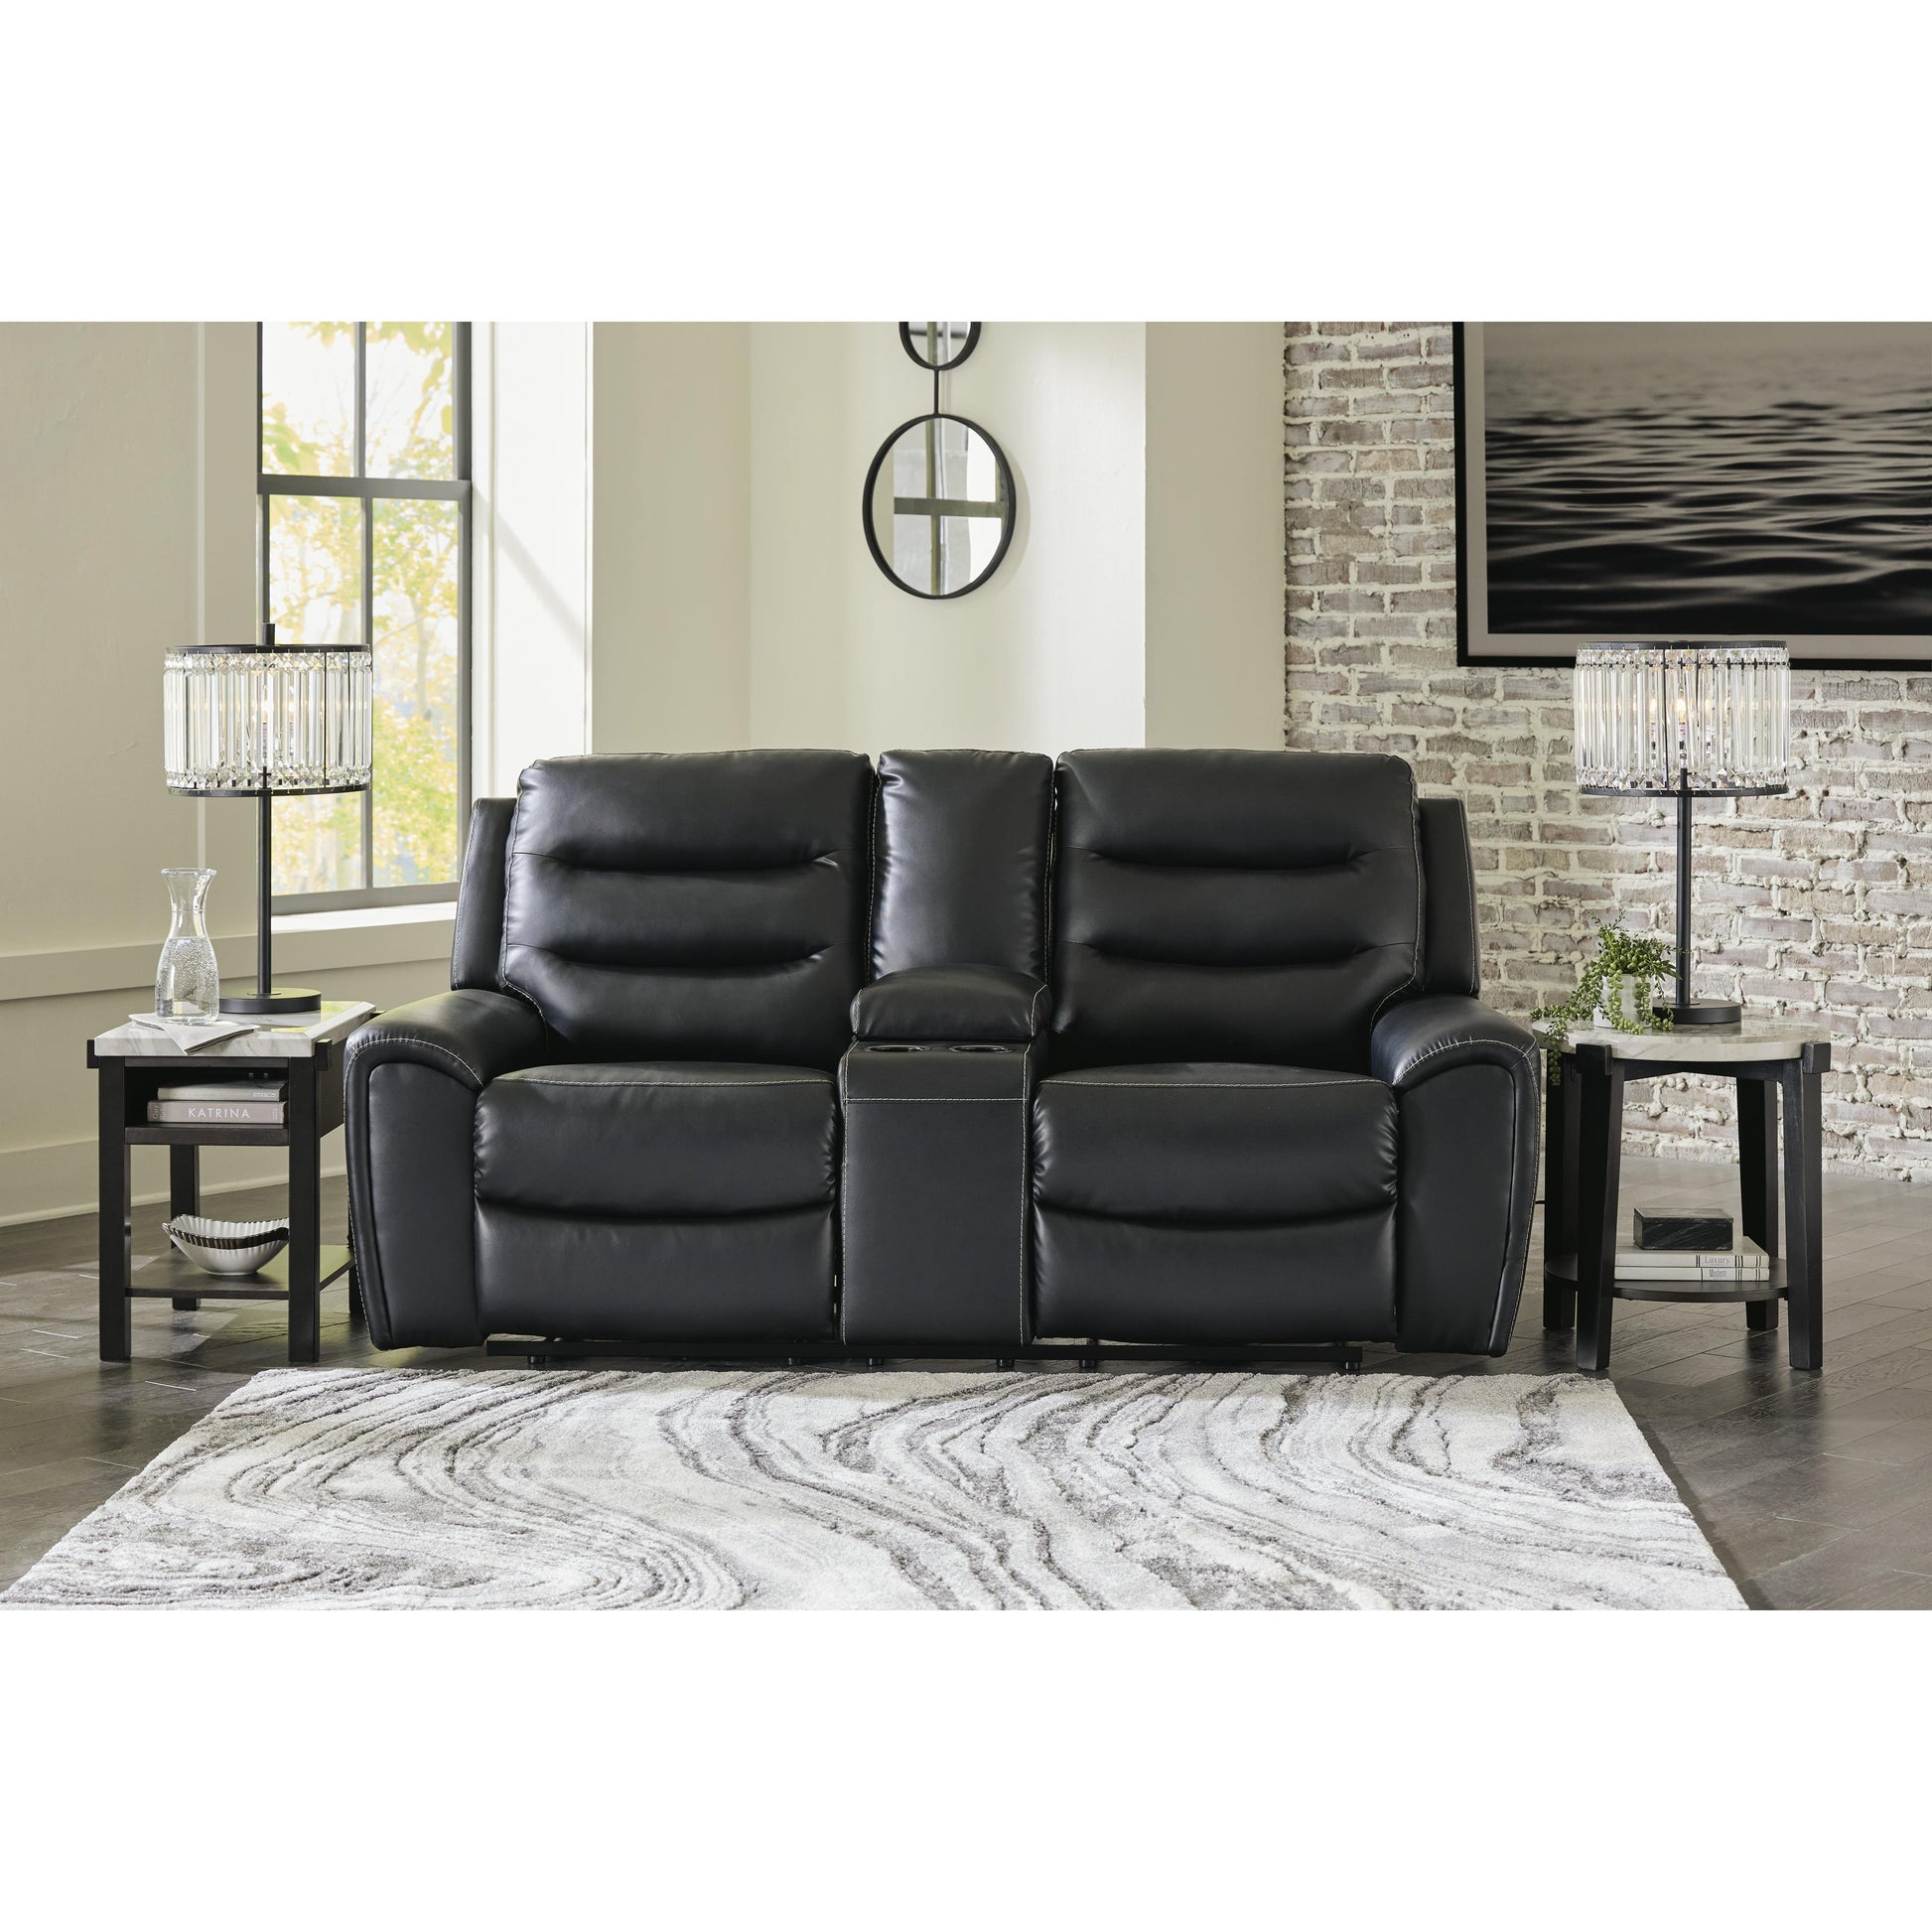 Signature Design by Ashley Warlin Power Reclining Leather Look Loveseat 6110518 IMAGE 6